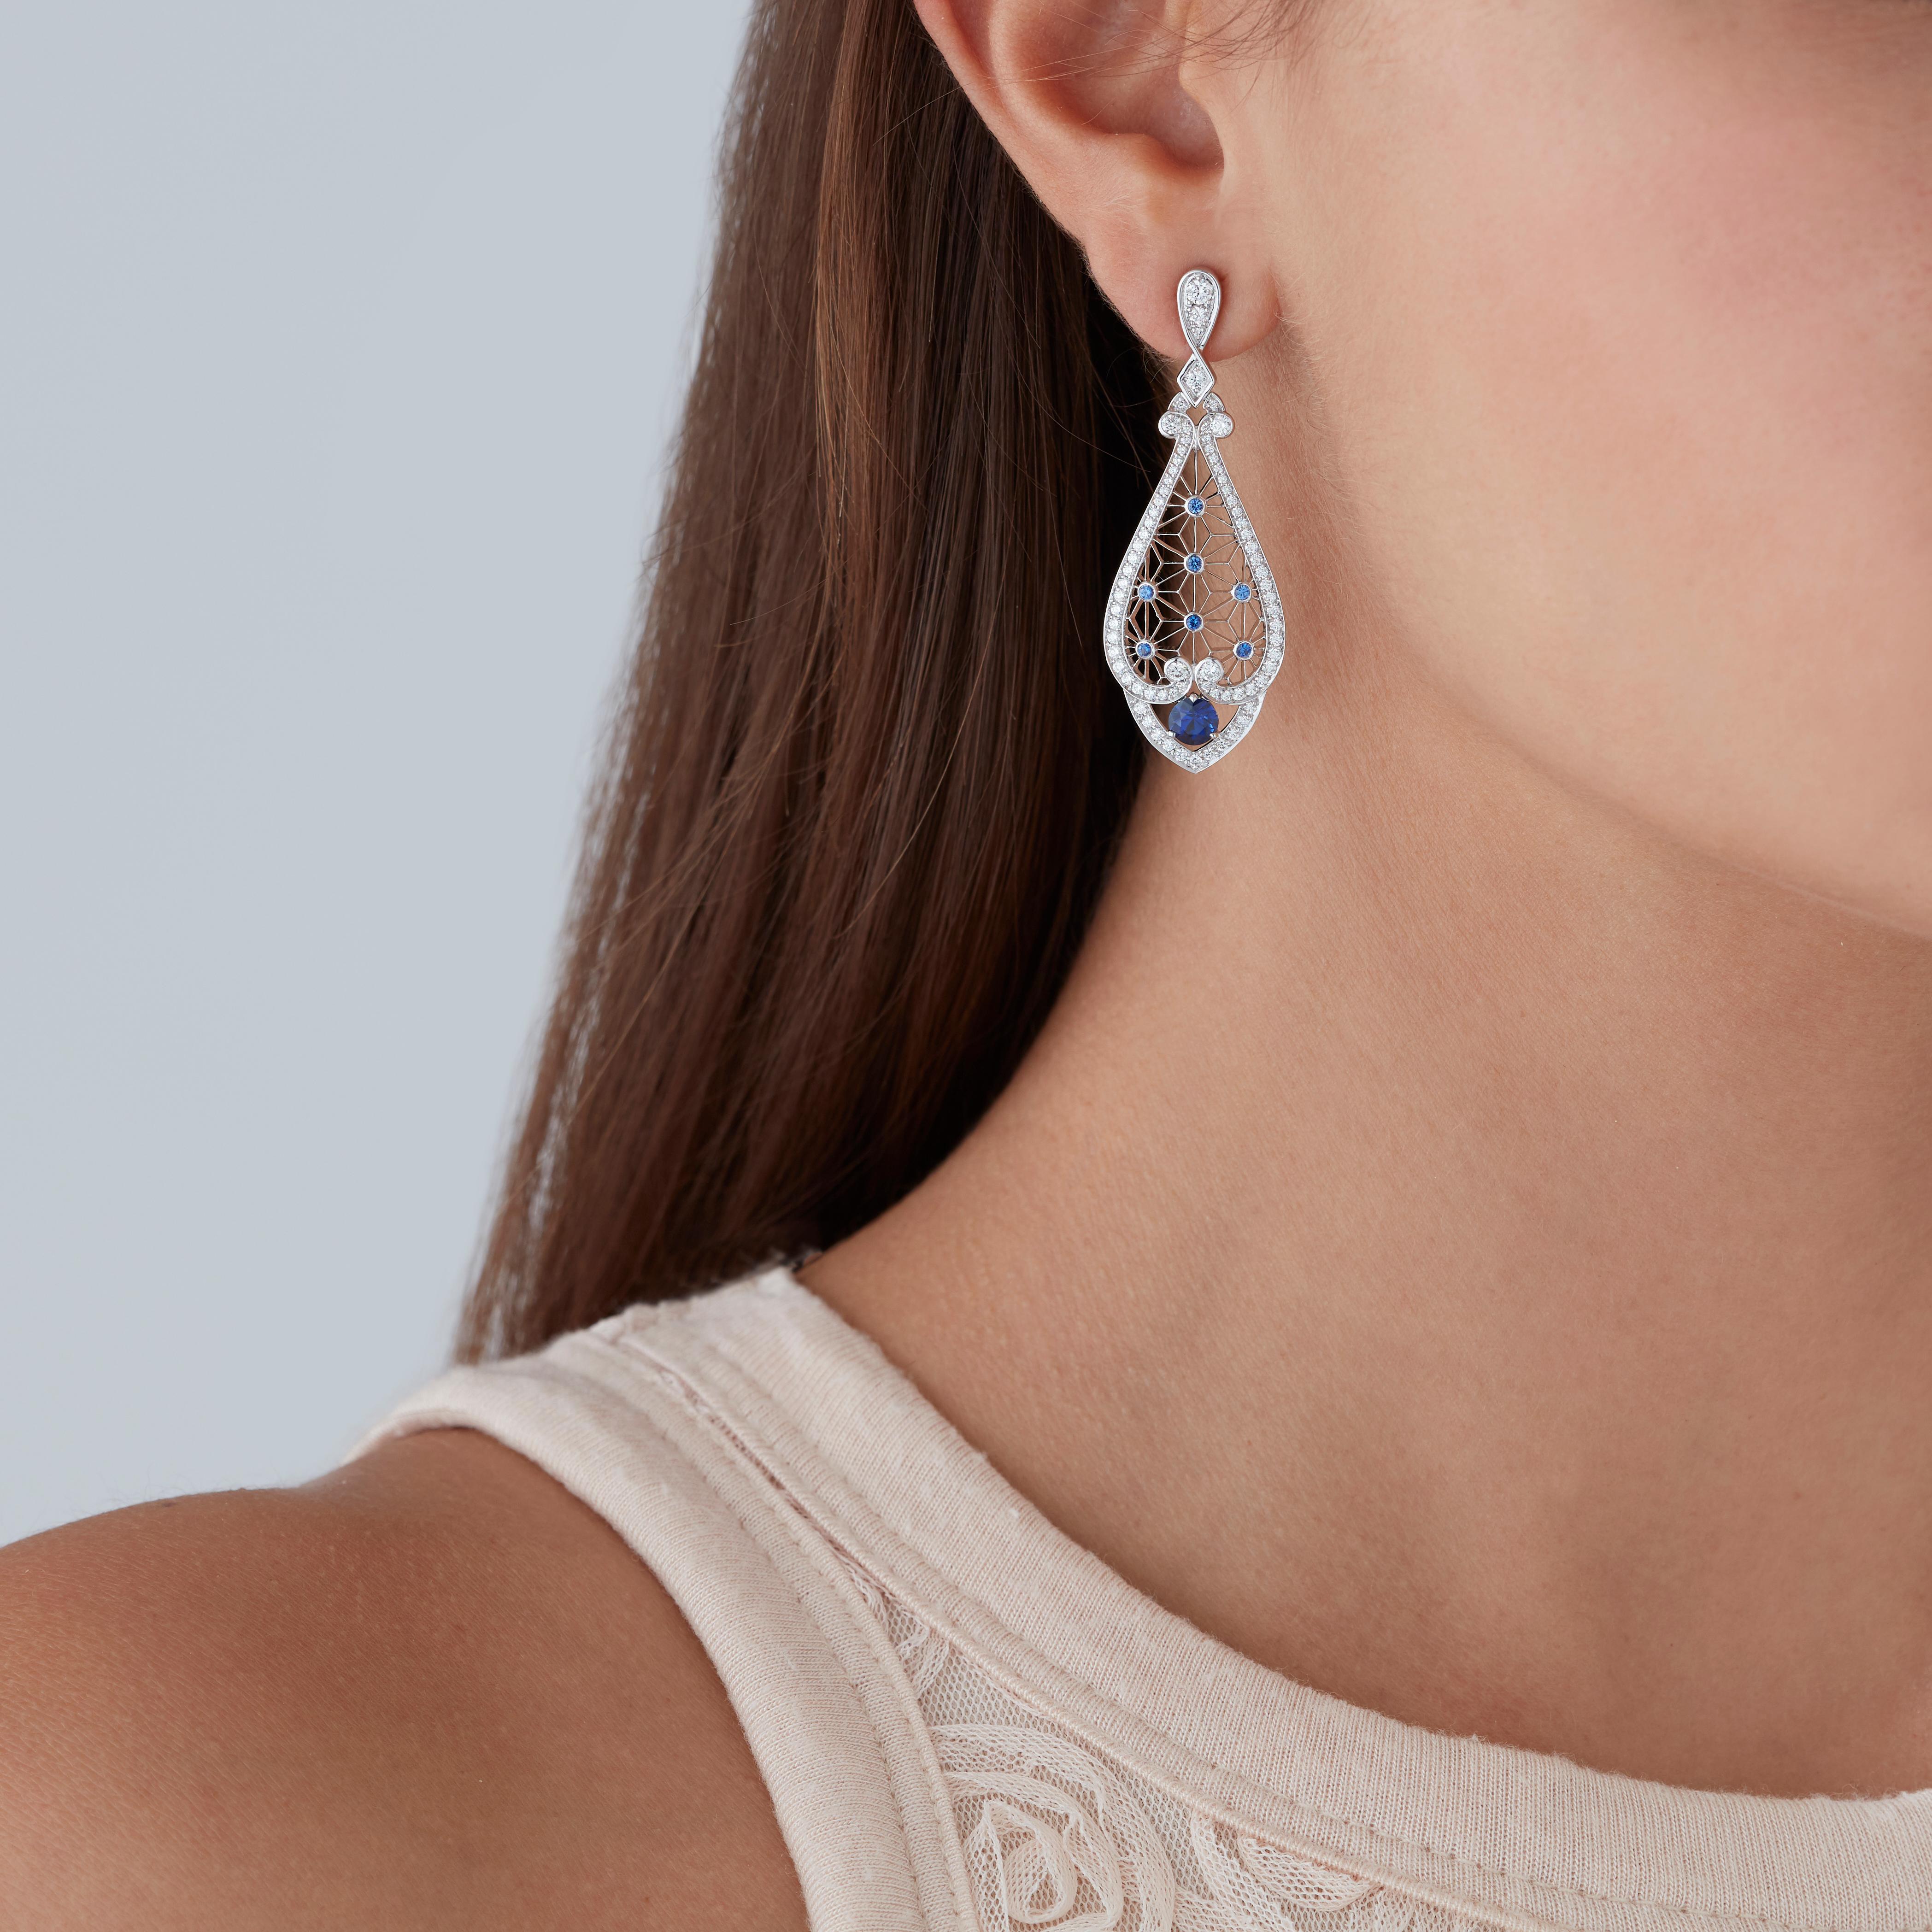 A House of Garrard pair of 18 karat white gold 'Filigree' earrings with drops from the 'Muse' collection, set with round white diamonds and round blue sapphires.         

150 round white diamonds weighing: 1.41cts
16 blue sapphires weighing: